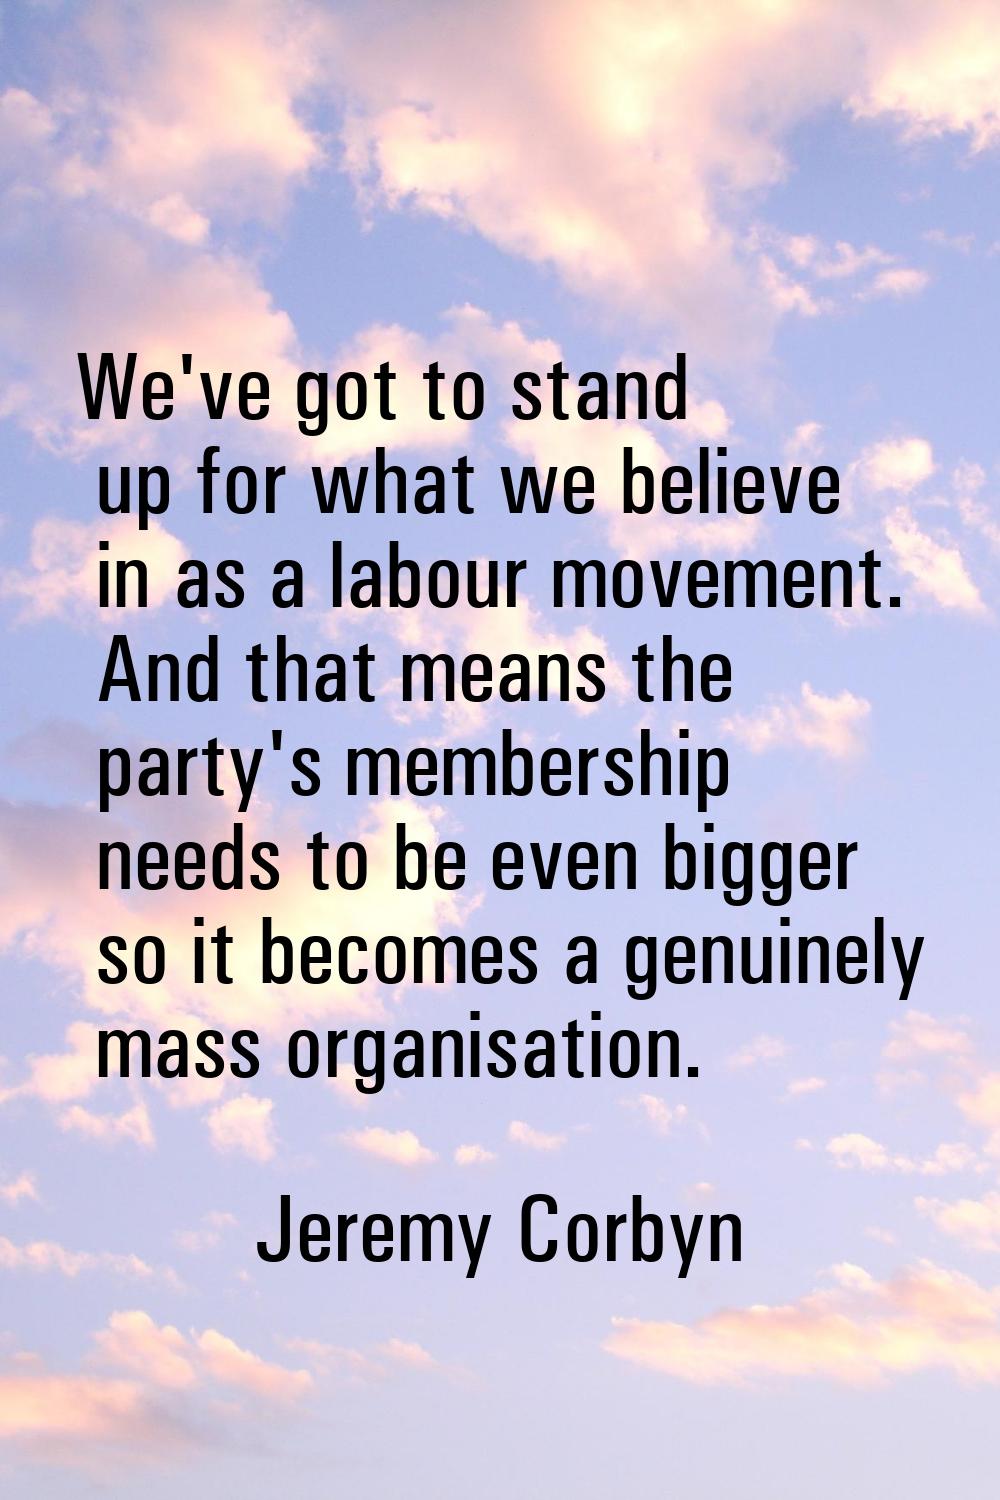 We've got to stand up for what we believe in as a labour movement. And that means the party's membe